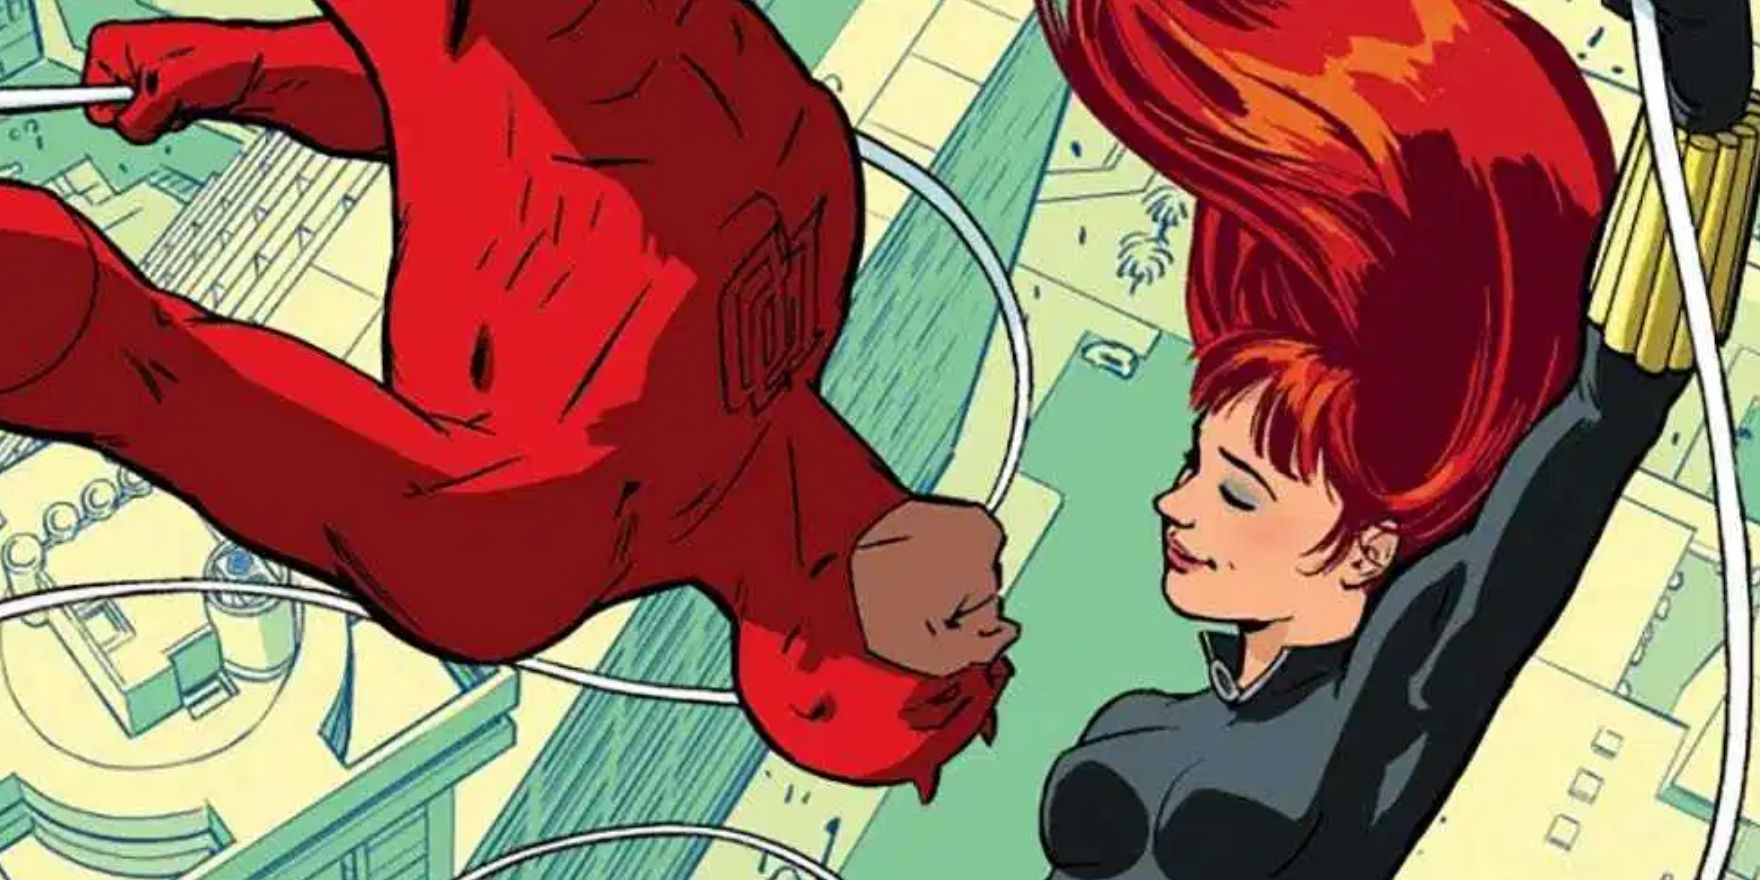 Daredevil and Black Widow swing over the city in Marvel Comics